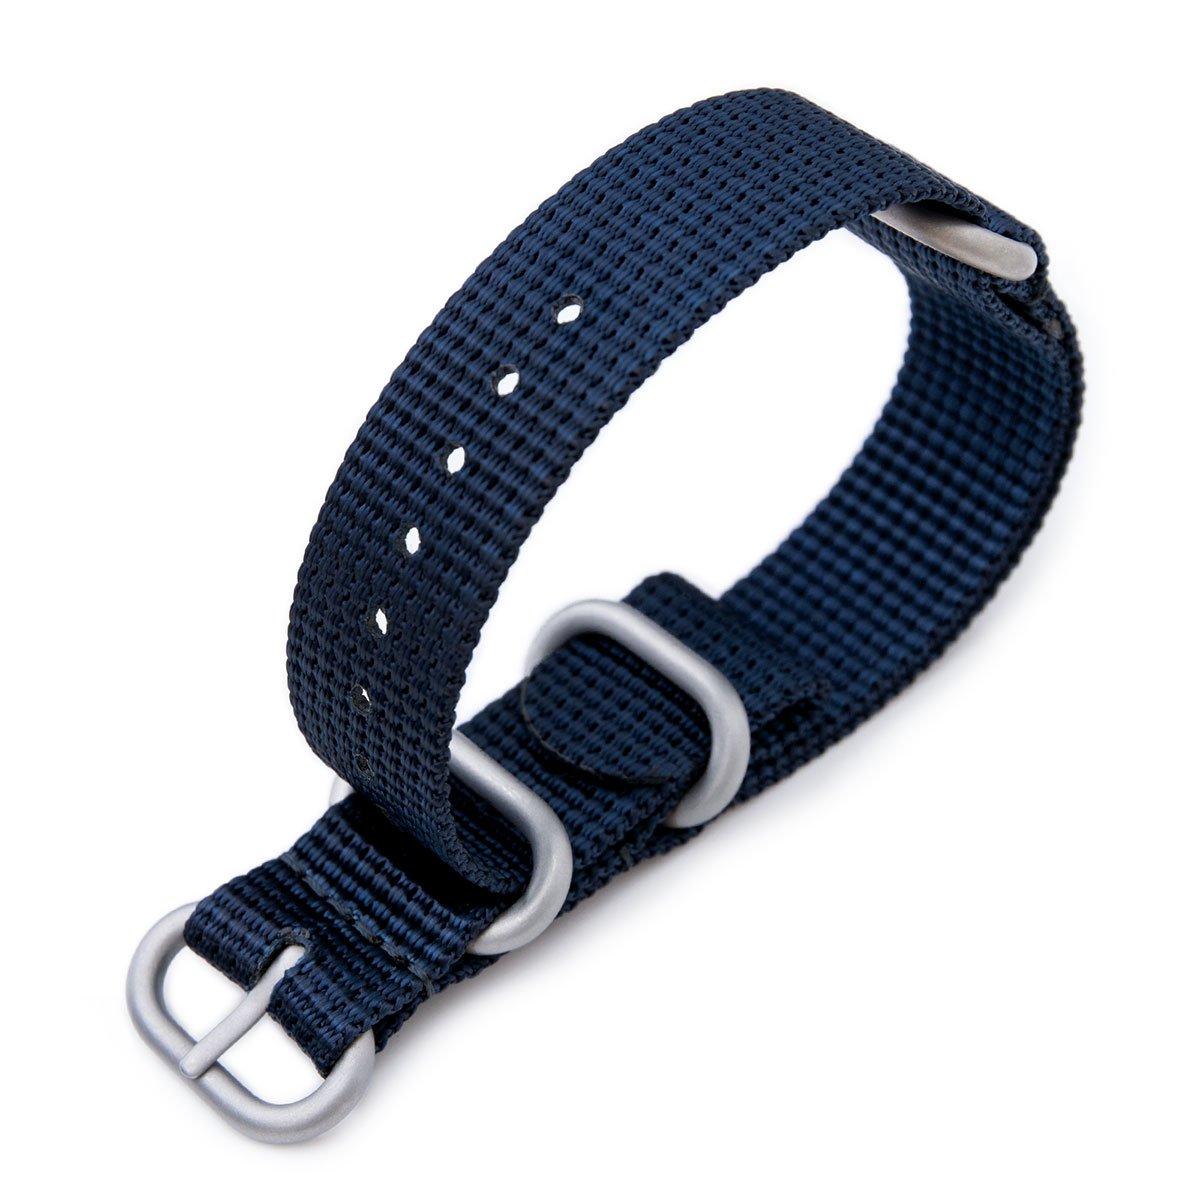 MiLTAT 18mm 3 Rings Zulu military watch strap 3D woven nylon armband Navy Blue Brushed Hardware Strapcode Watch Bands